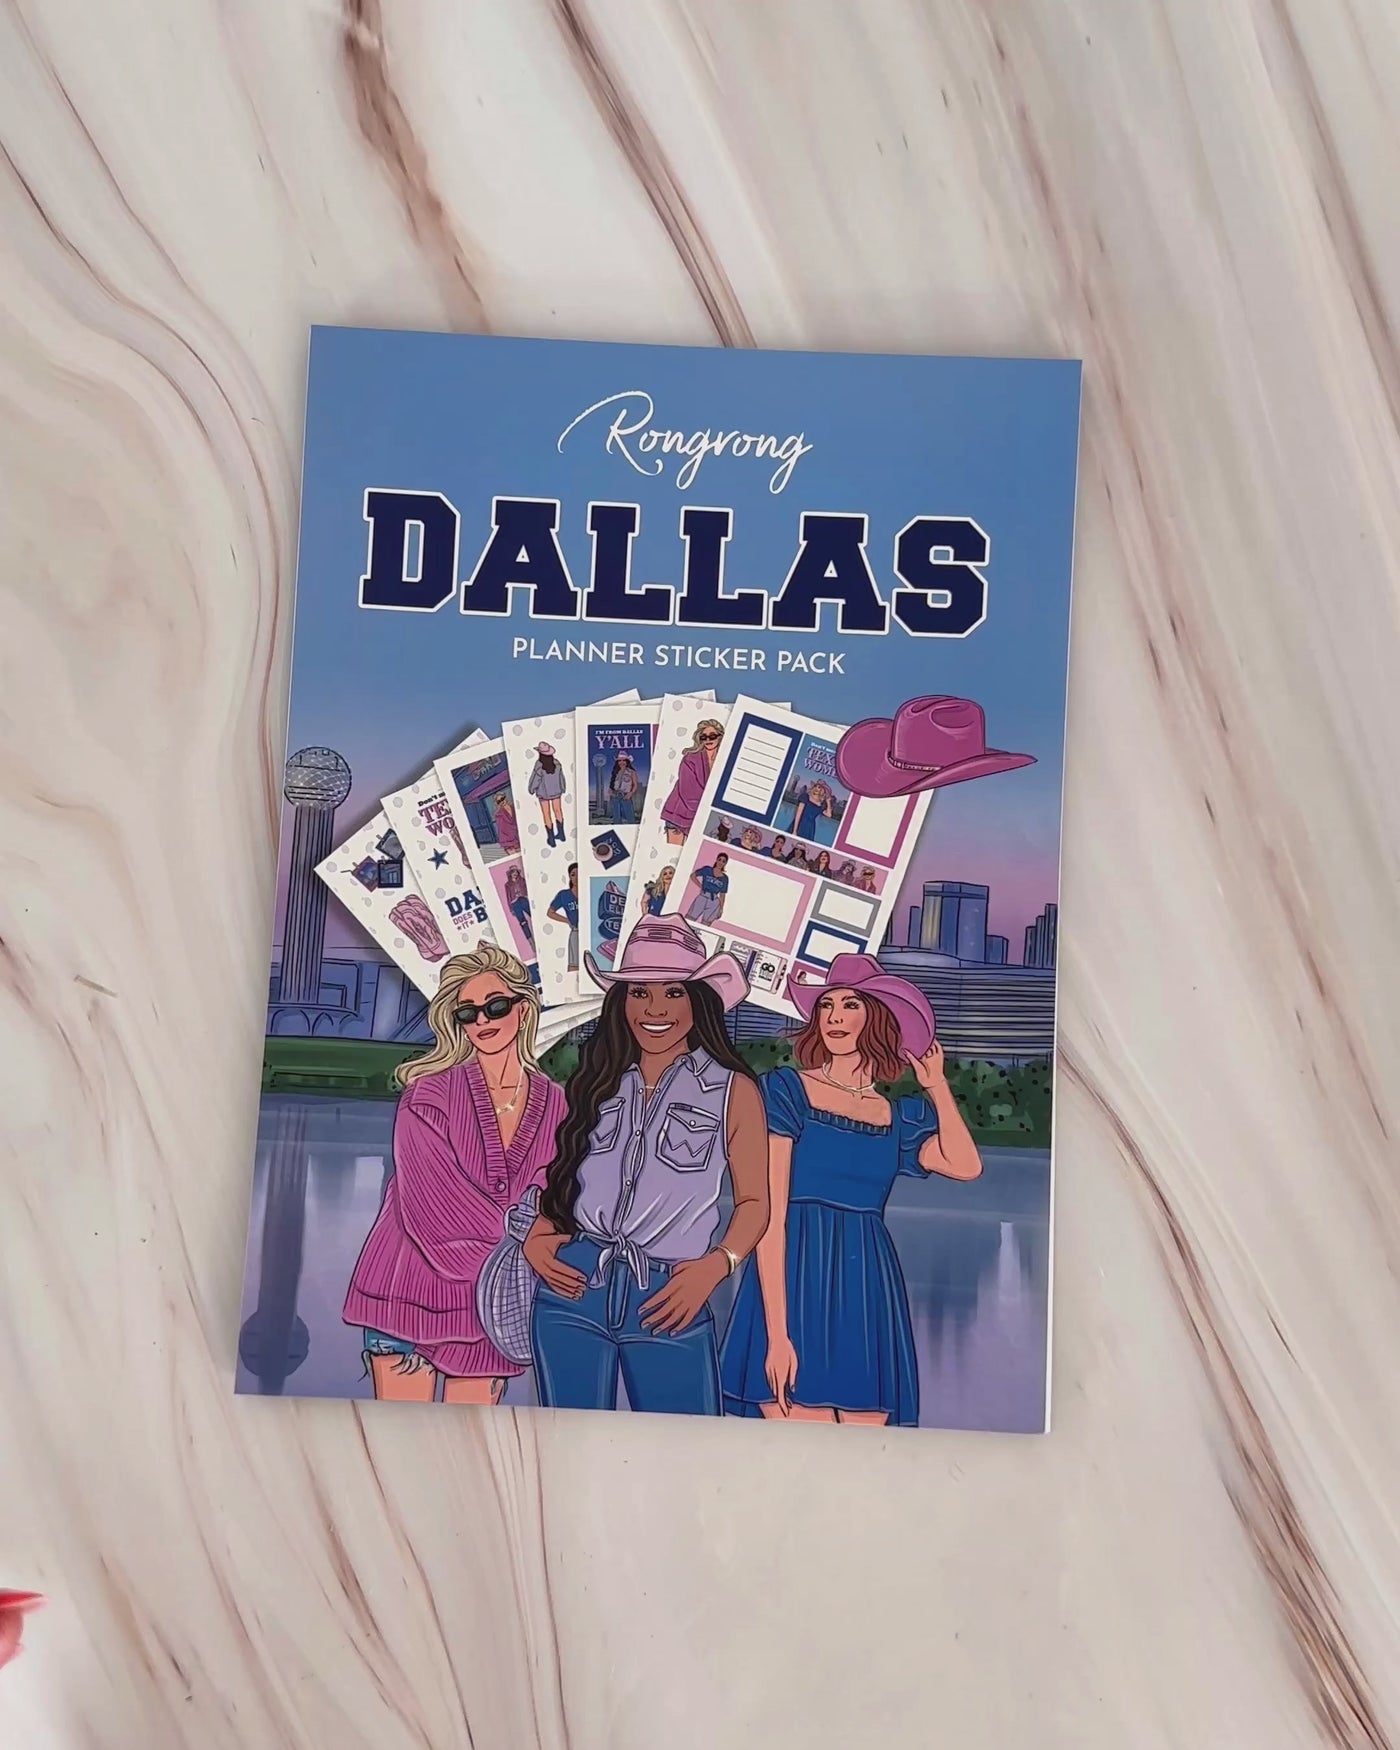 Dallas Planner Sticker Pack [Rongrong City Series]